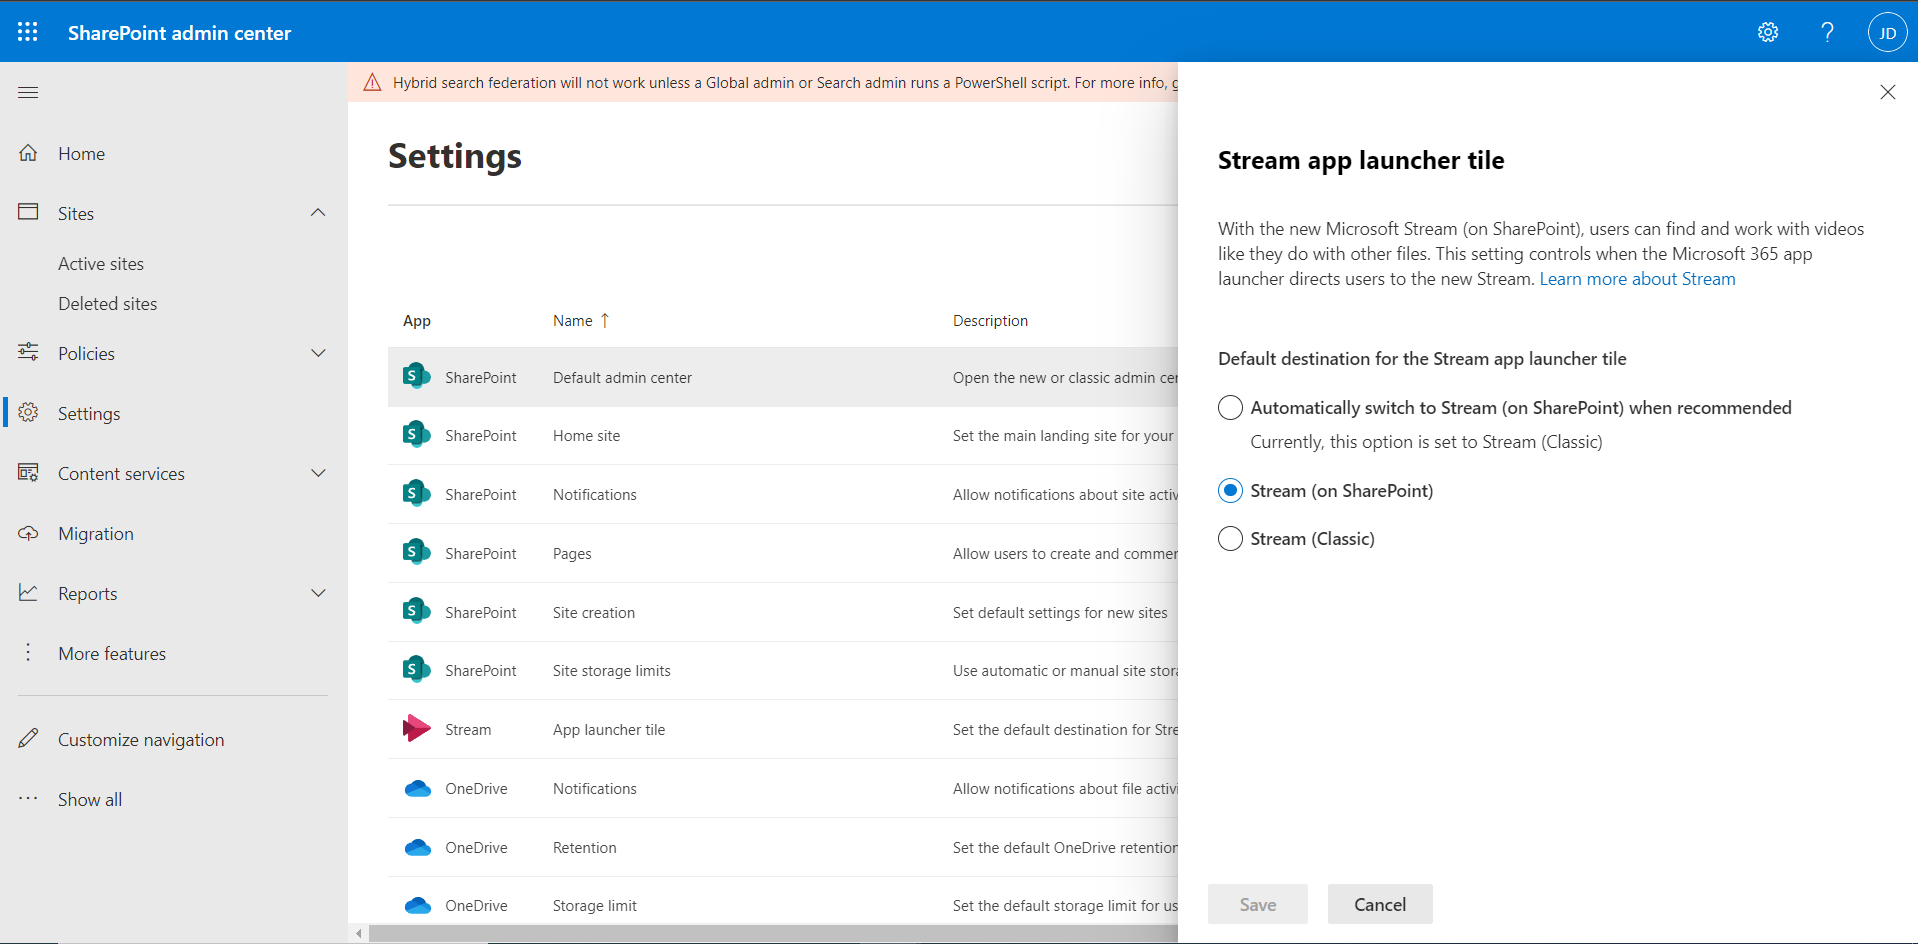 MC381948: Configure the existing Stream tile in Microsoft 365 app launcher to go to the new Stream app on Office.com